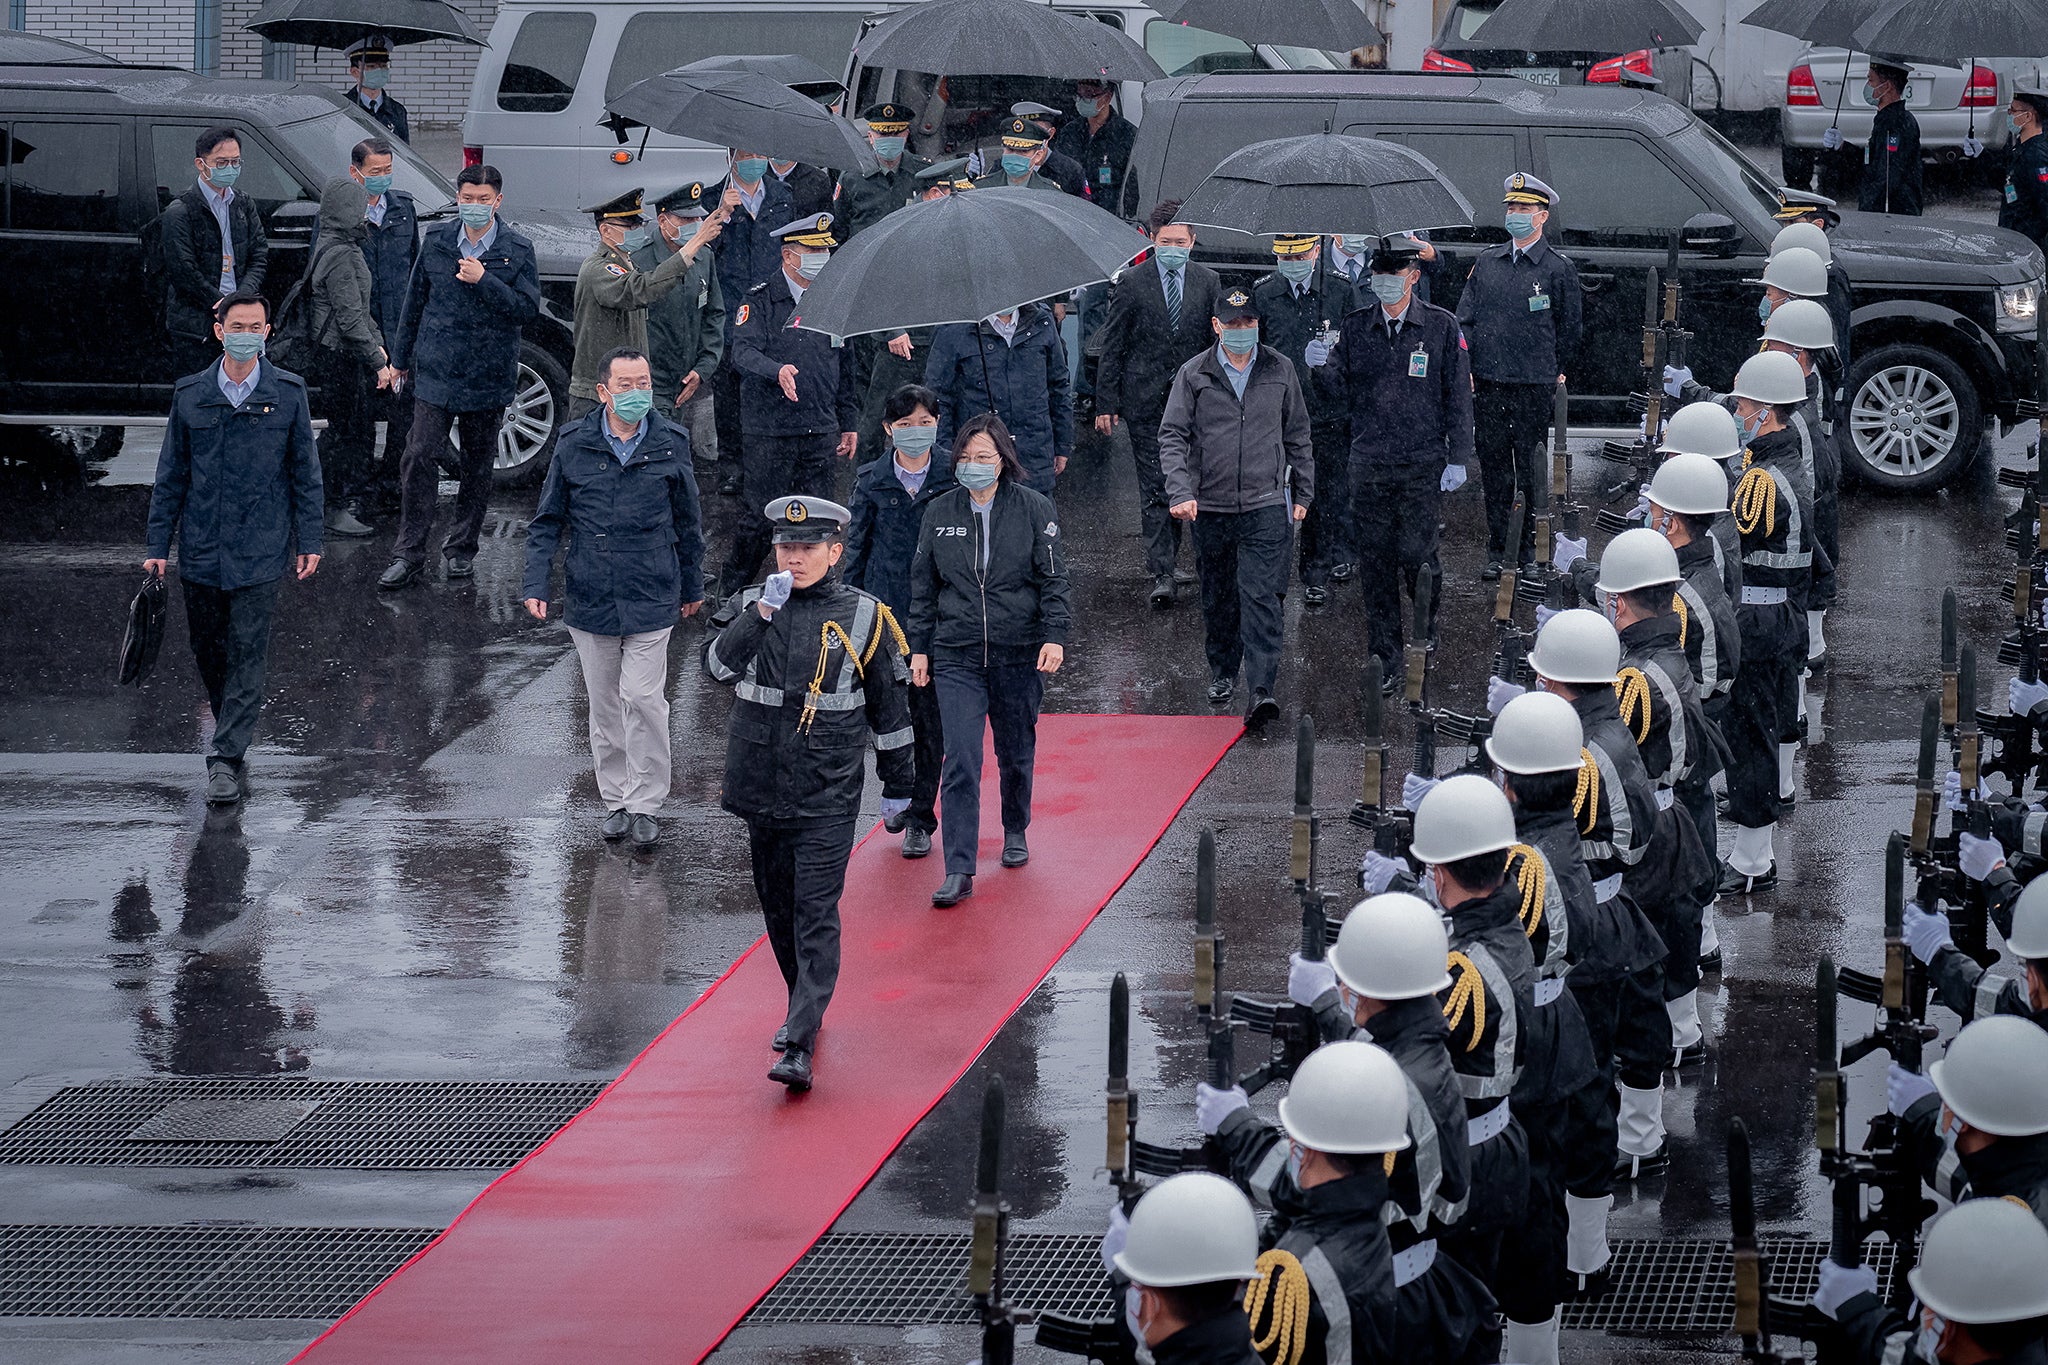 President Tsai Ing-wen arriving for a visit to a naval base in Keelung, Taiwan on 8 March, where she vowed not to lose 'any single inch' of territory amid renewed threats from China